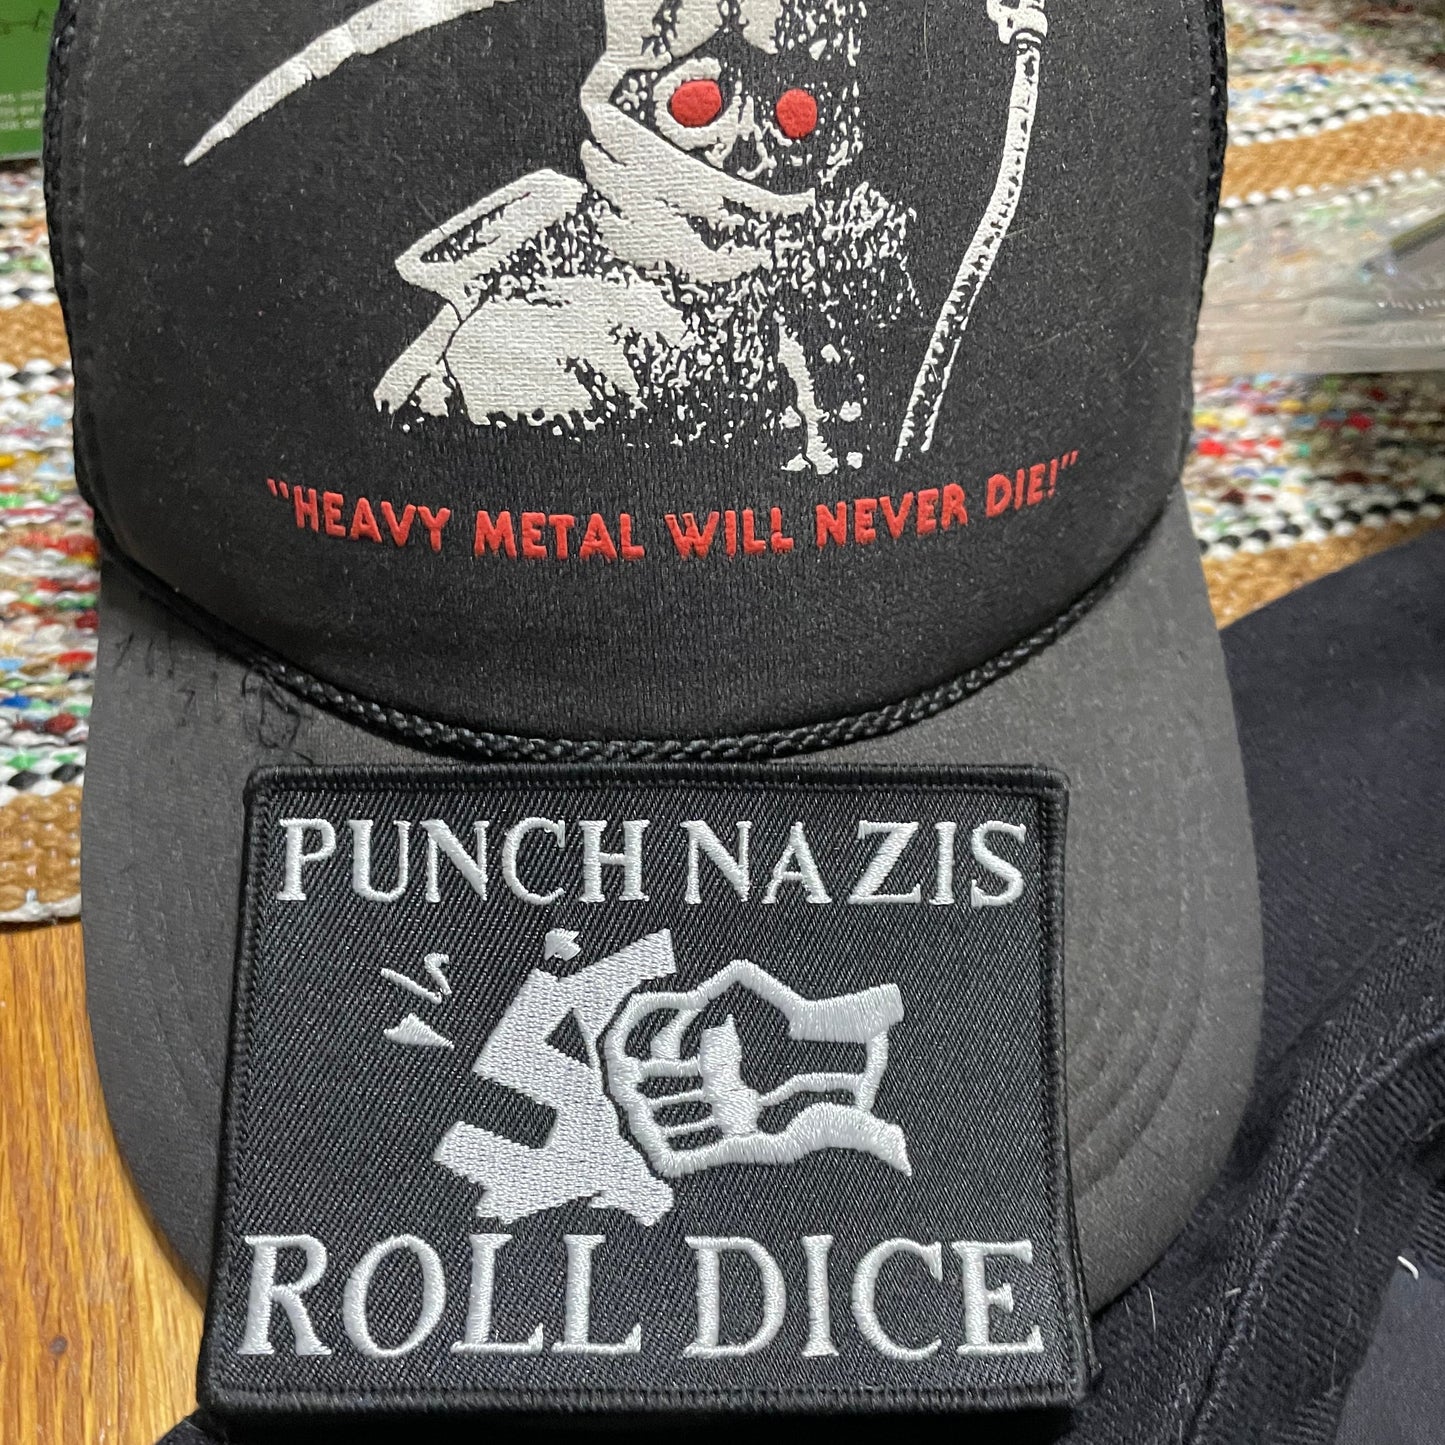 Punch Nazis / Roll Dice Embroidered Patch